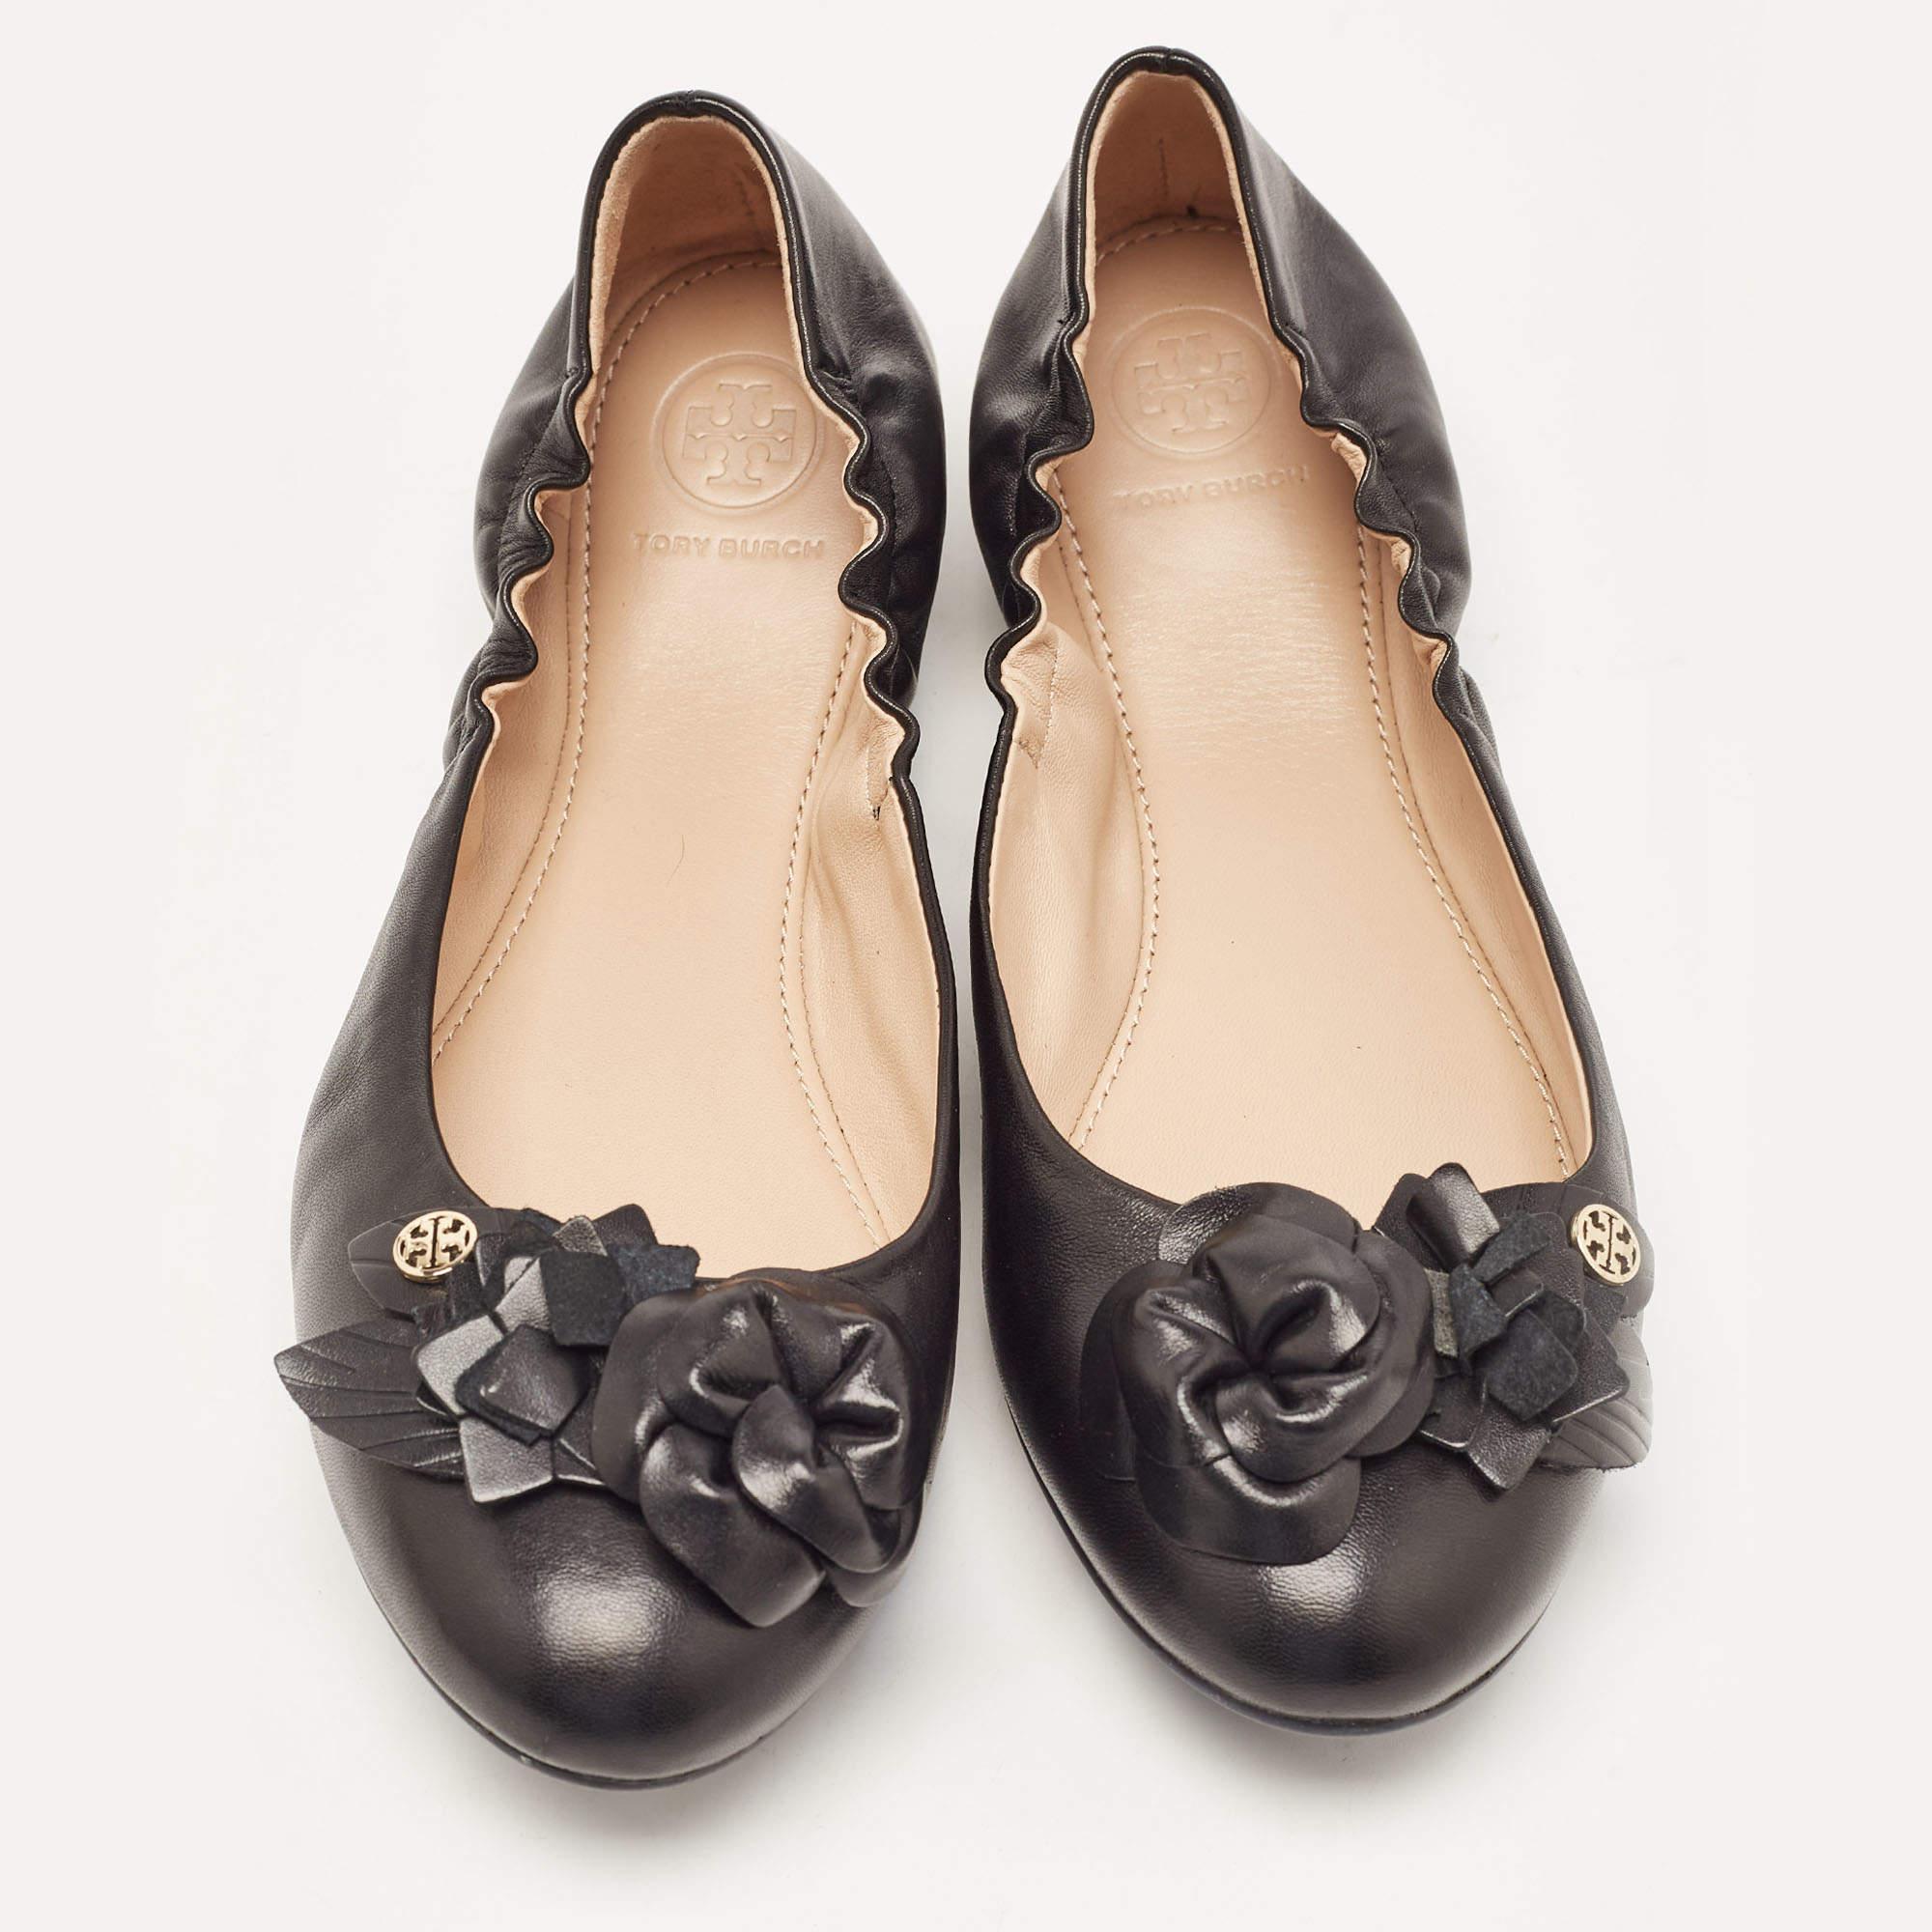 Tory Burch Black Leather Blossom Ballet Flats Size 39.5 For Sale 1